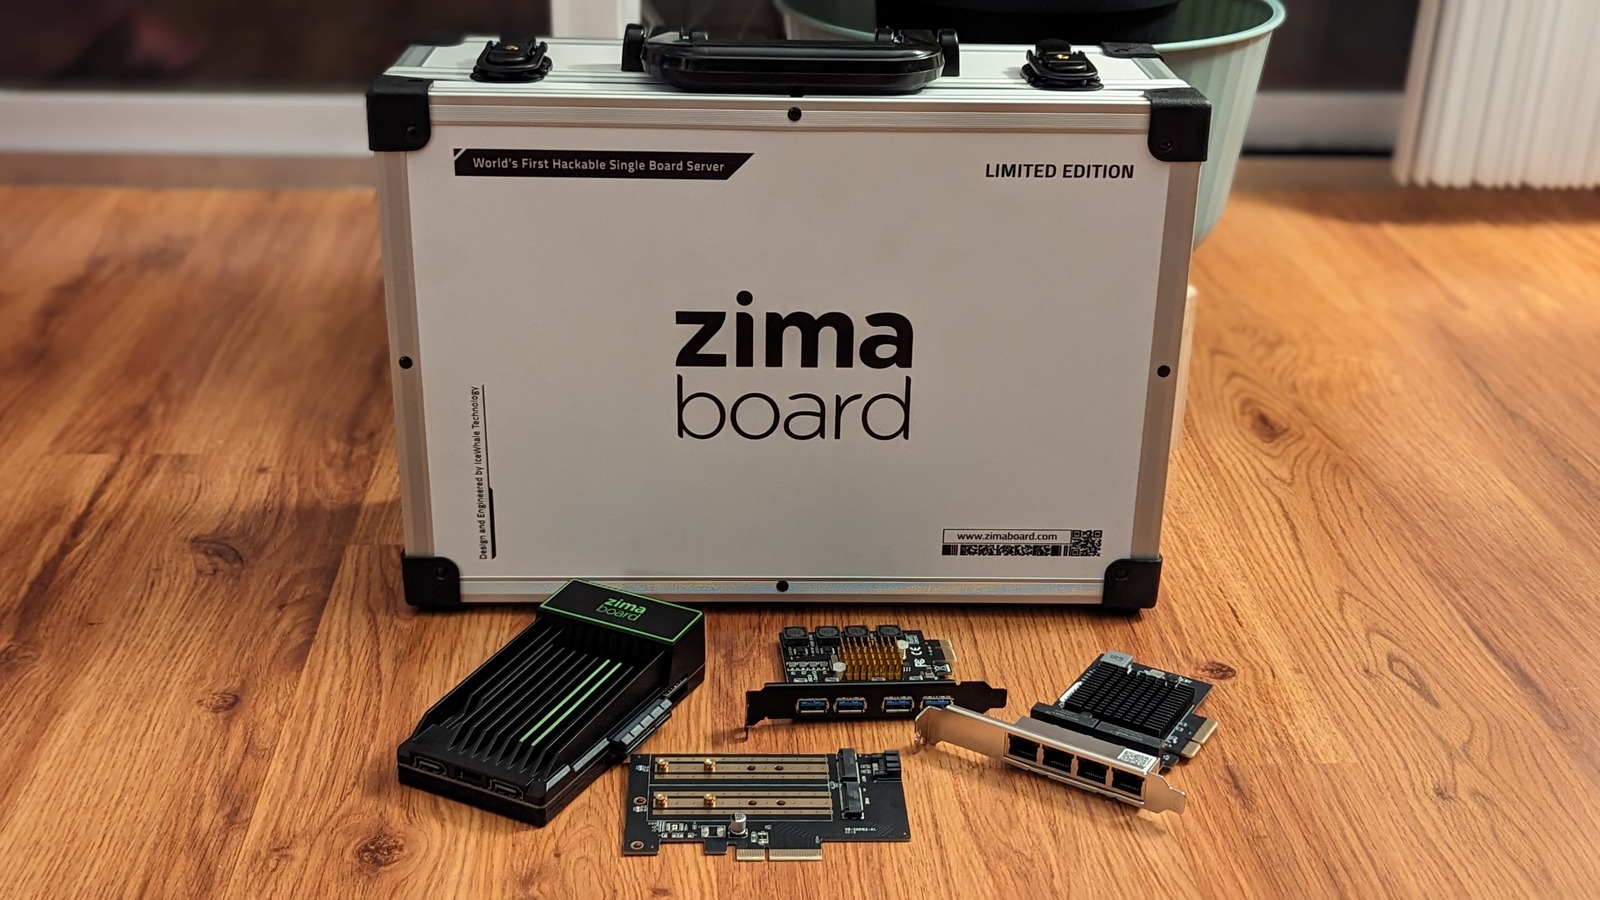 ZimaBoard 832 Review: A Versatile But Expensive Single-Board Solution